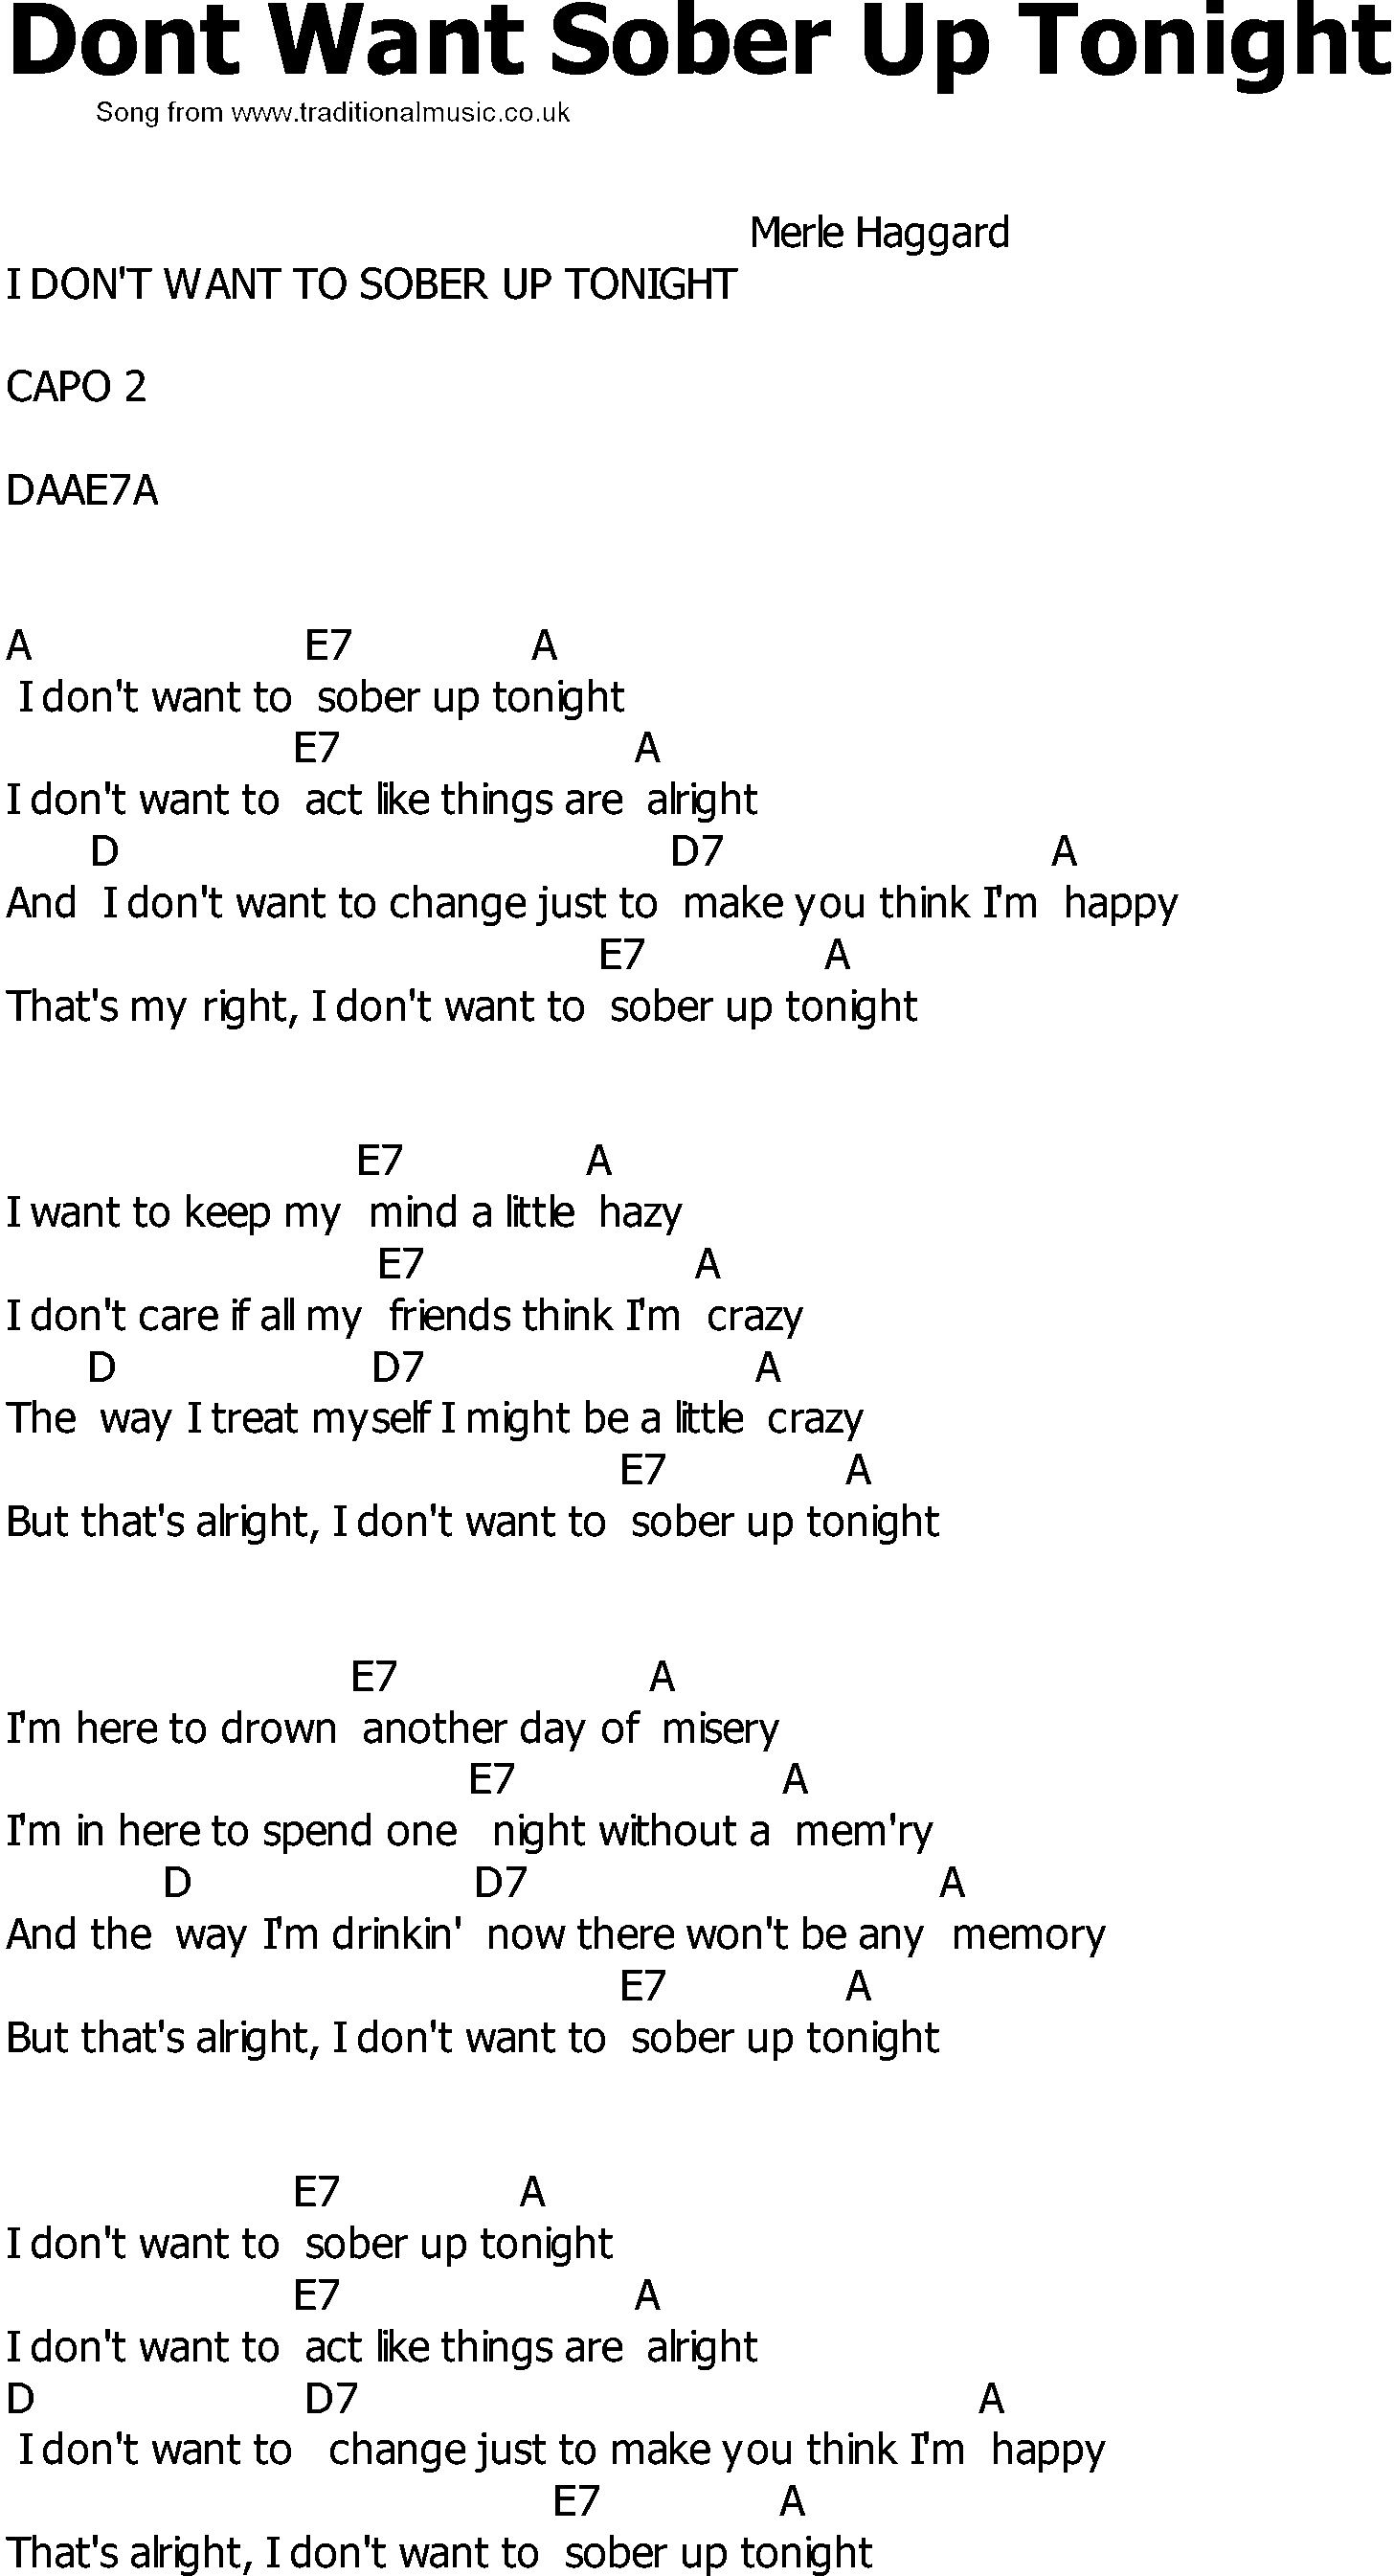 Old Country song lyrics with chords - Dont Want Sober Up Tonight